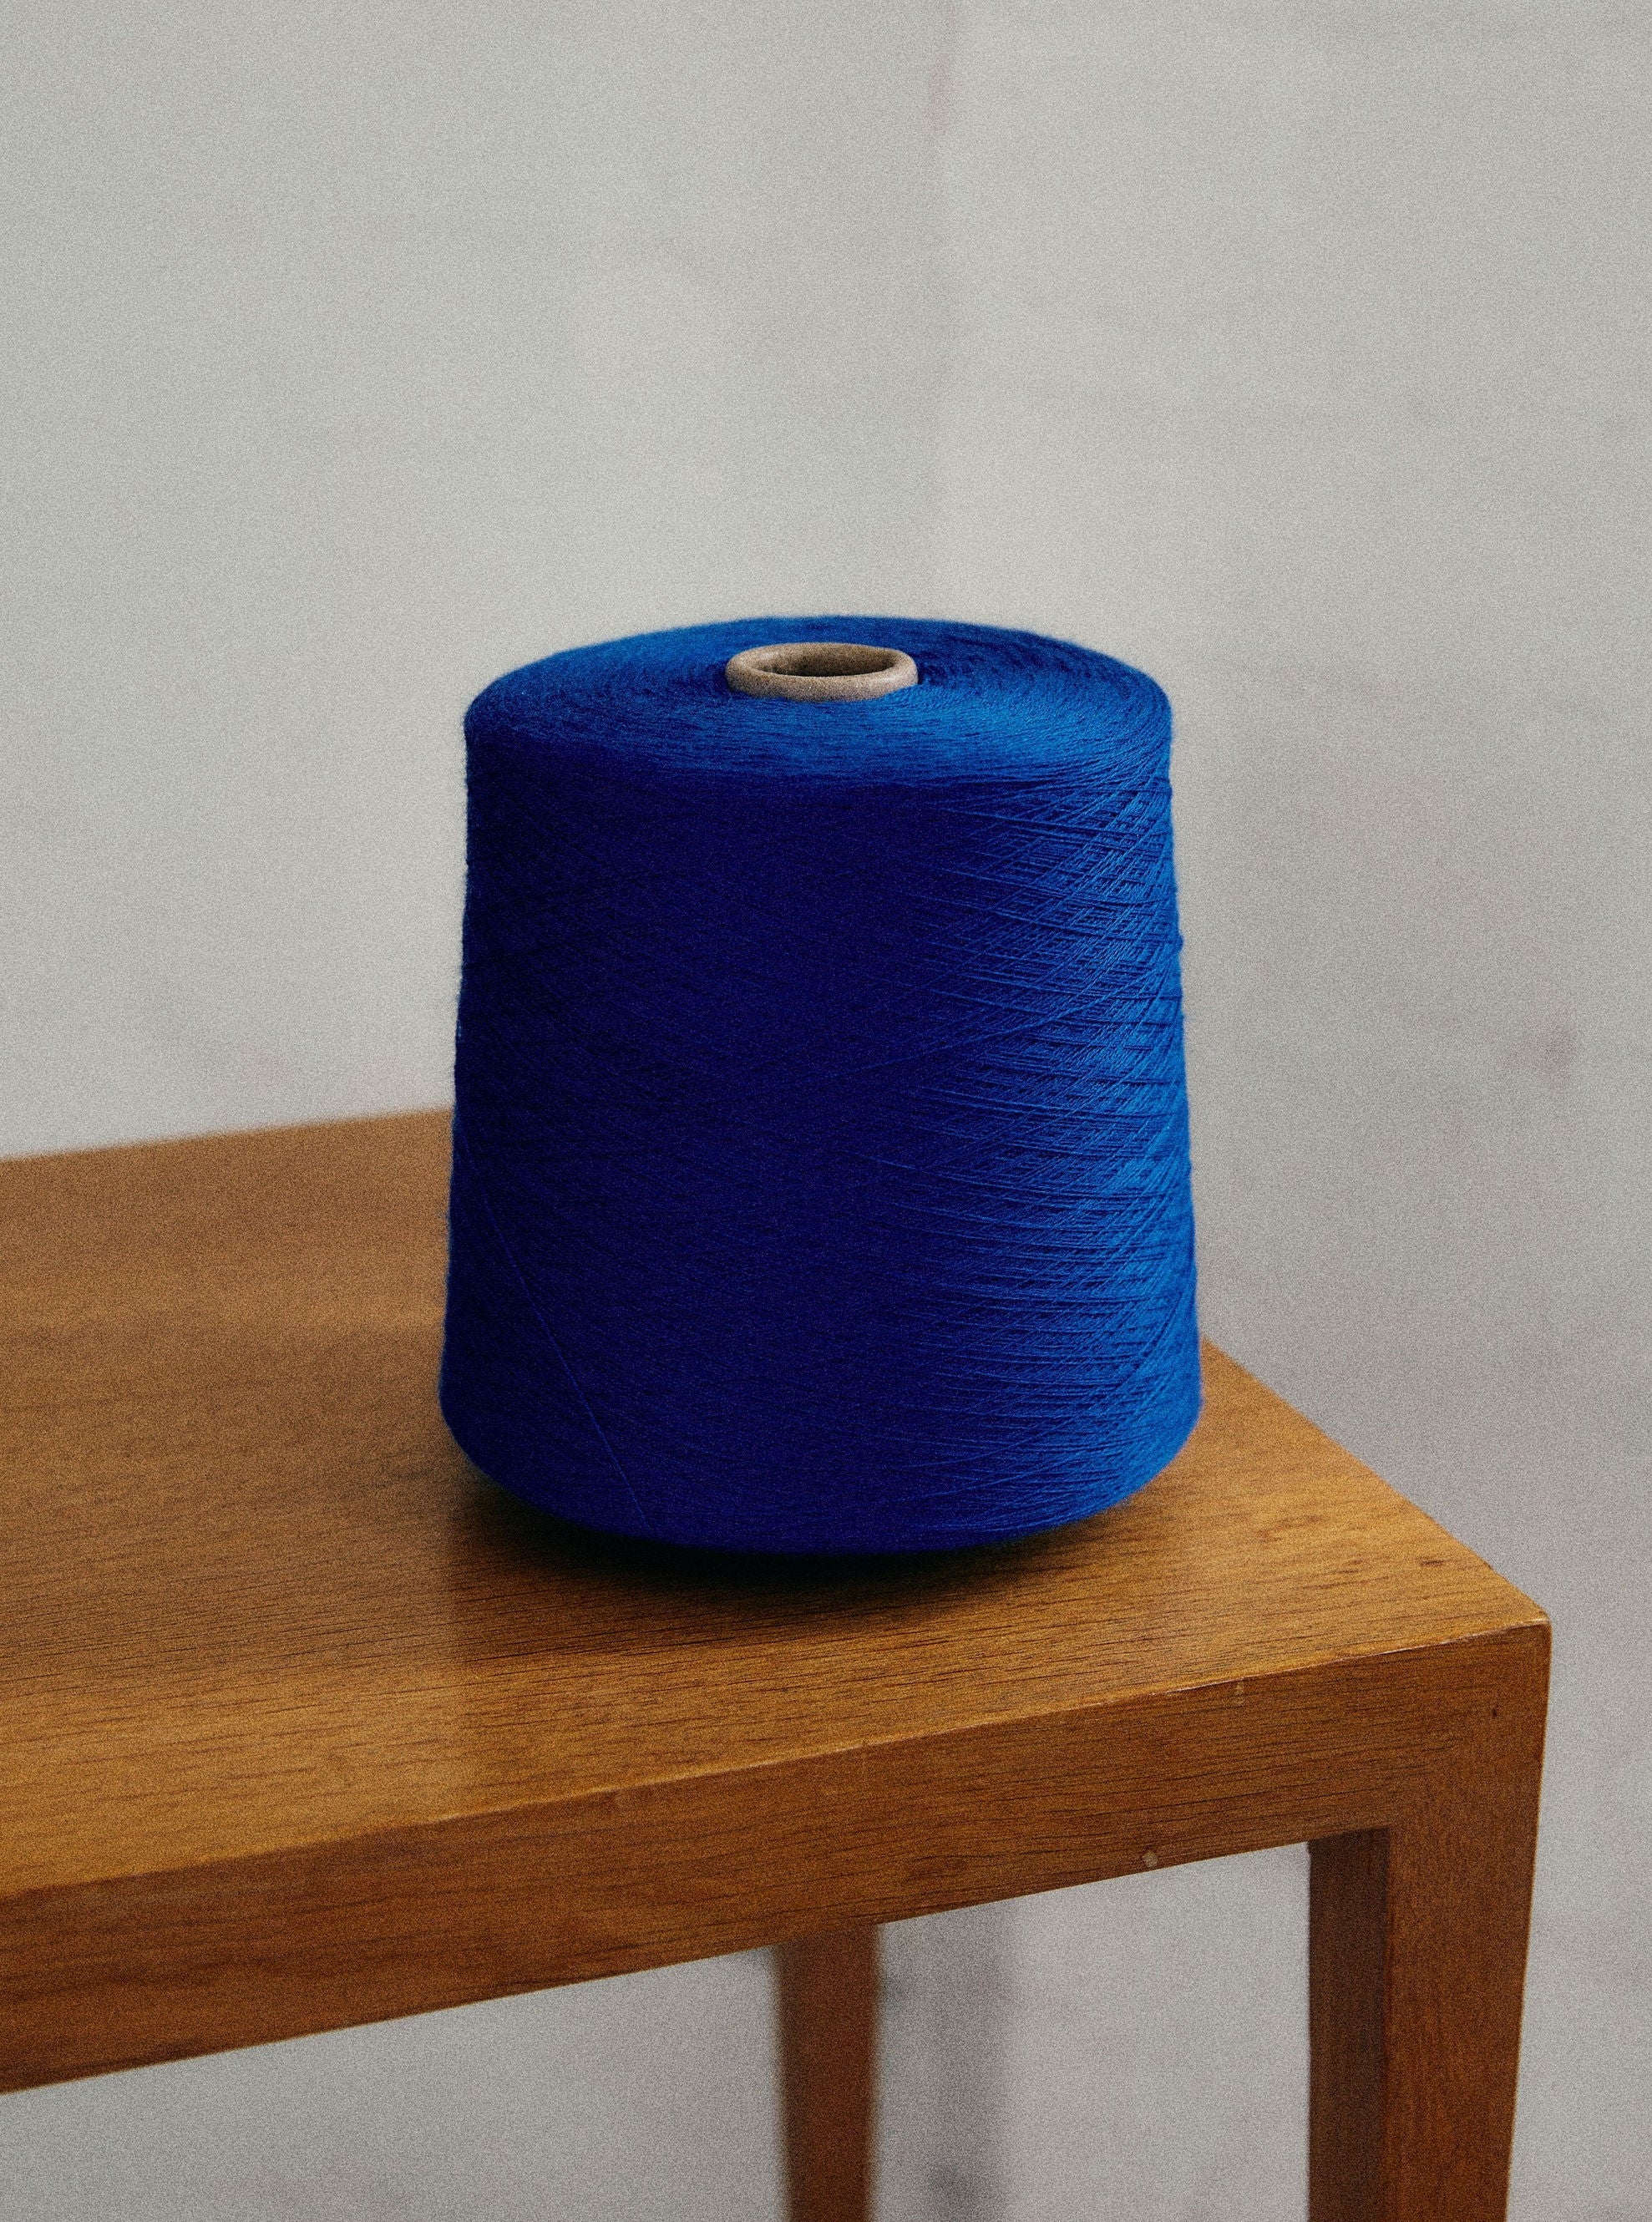 A blue Check merino wool blanket. Bright and rich in colour and handfeel. The blanket is 2kg of the finest Australian Merino wool. sizes baby, queen and king. 